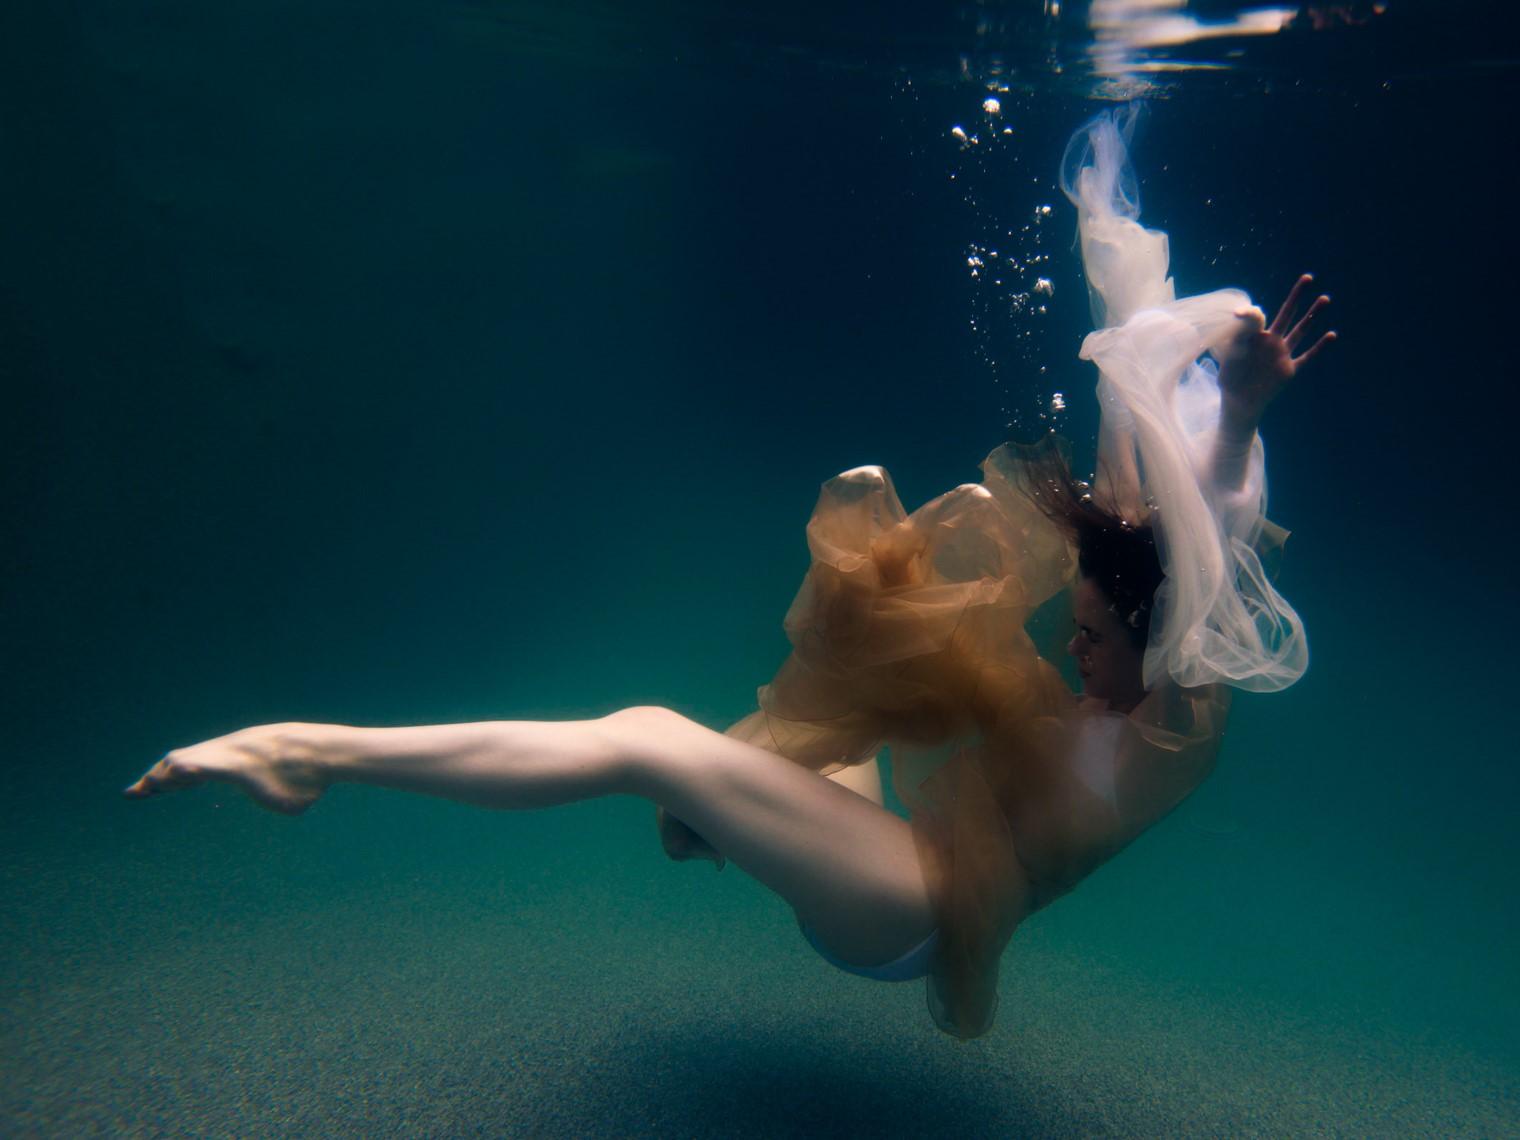 This contemporary figural limited edition photograph by Alyssa Fortin titled "Odette's Last Breath Before..." is a reinterpretation of the mythological story of Odette, the swan from Swan Lake. In this image, a female figure wearing a dress made of